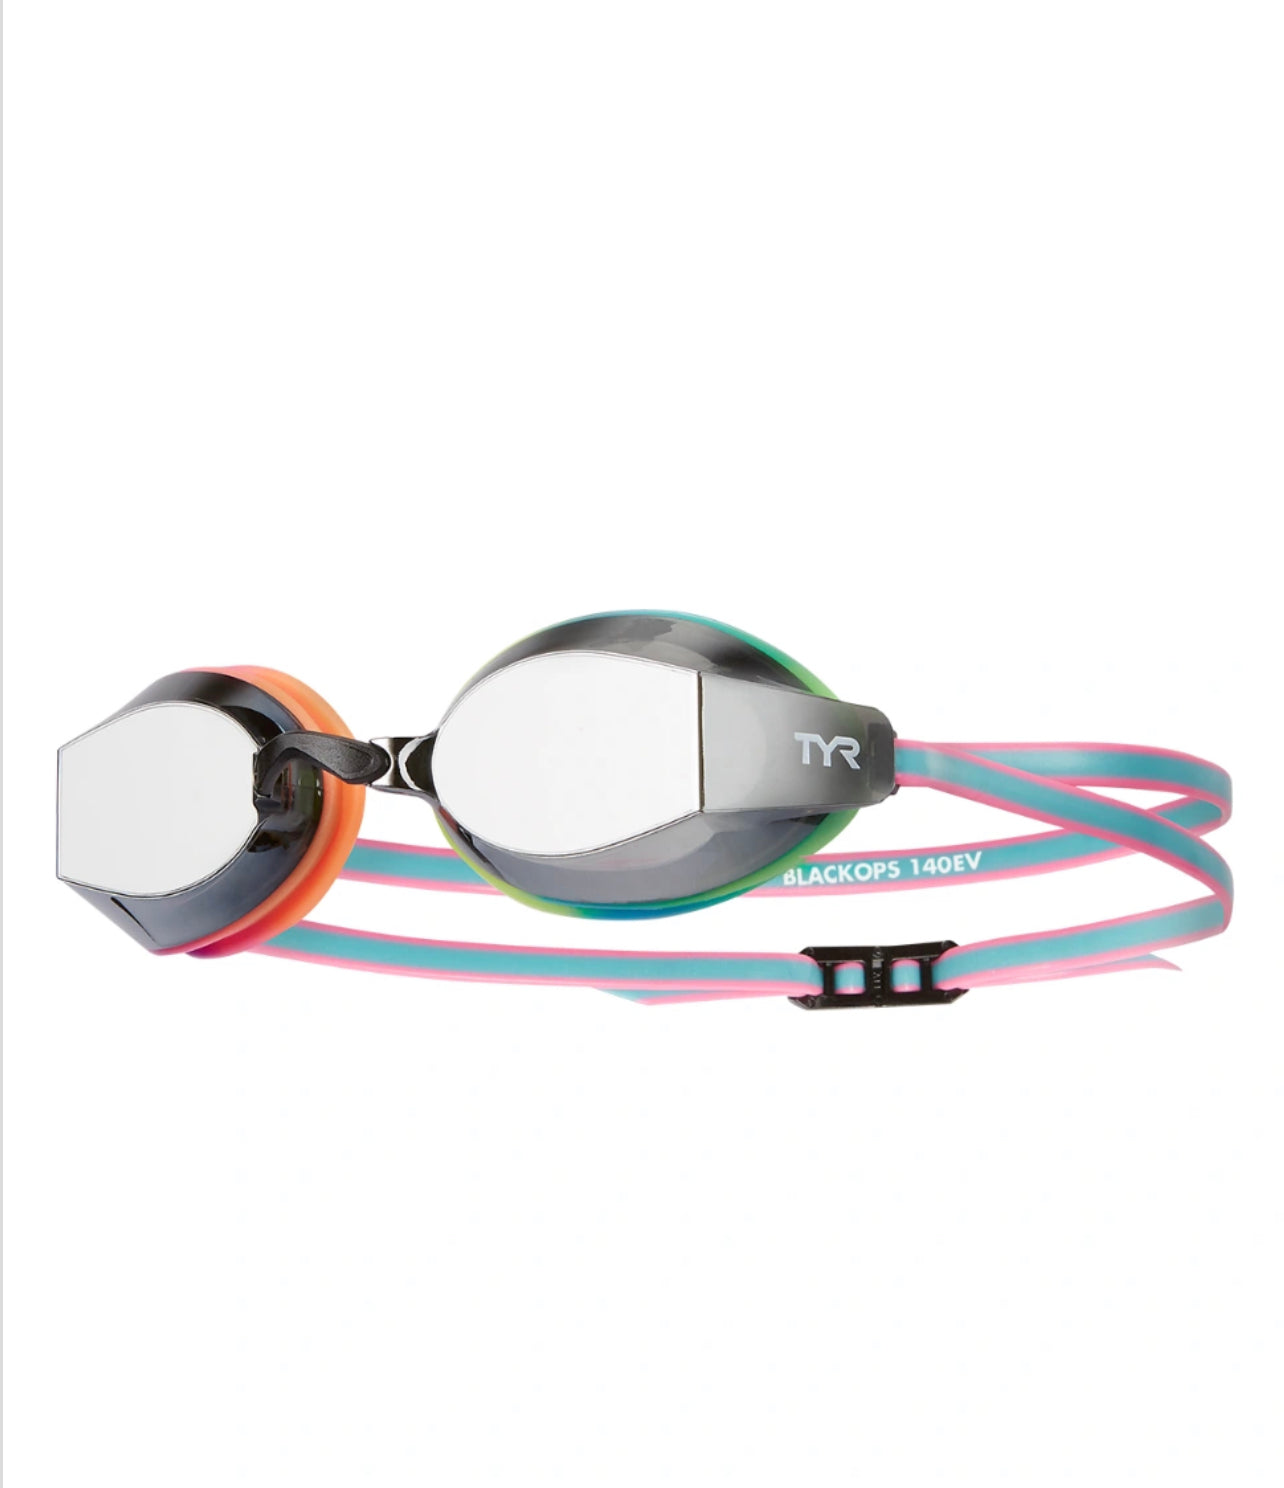 TYR ADULT BLACK 0PS 140 EV Mirrored Racing Goggles